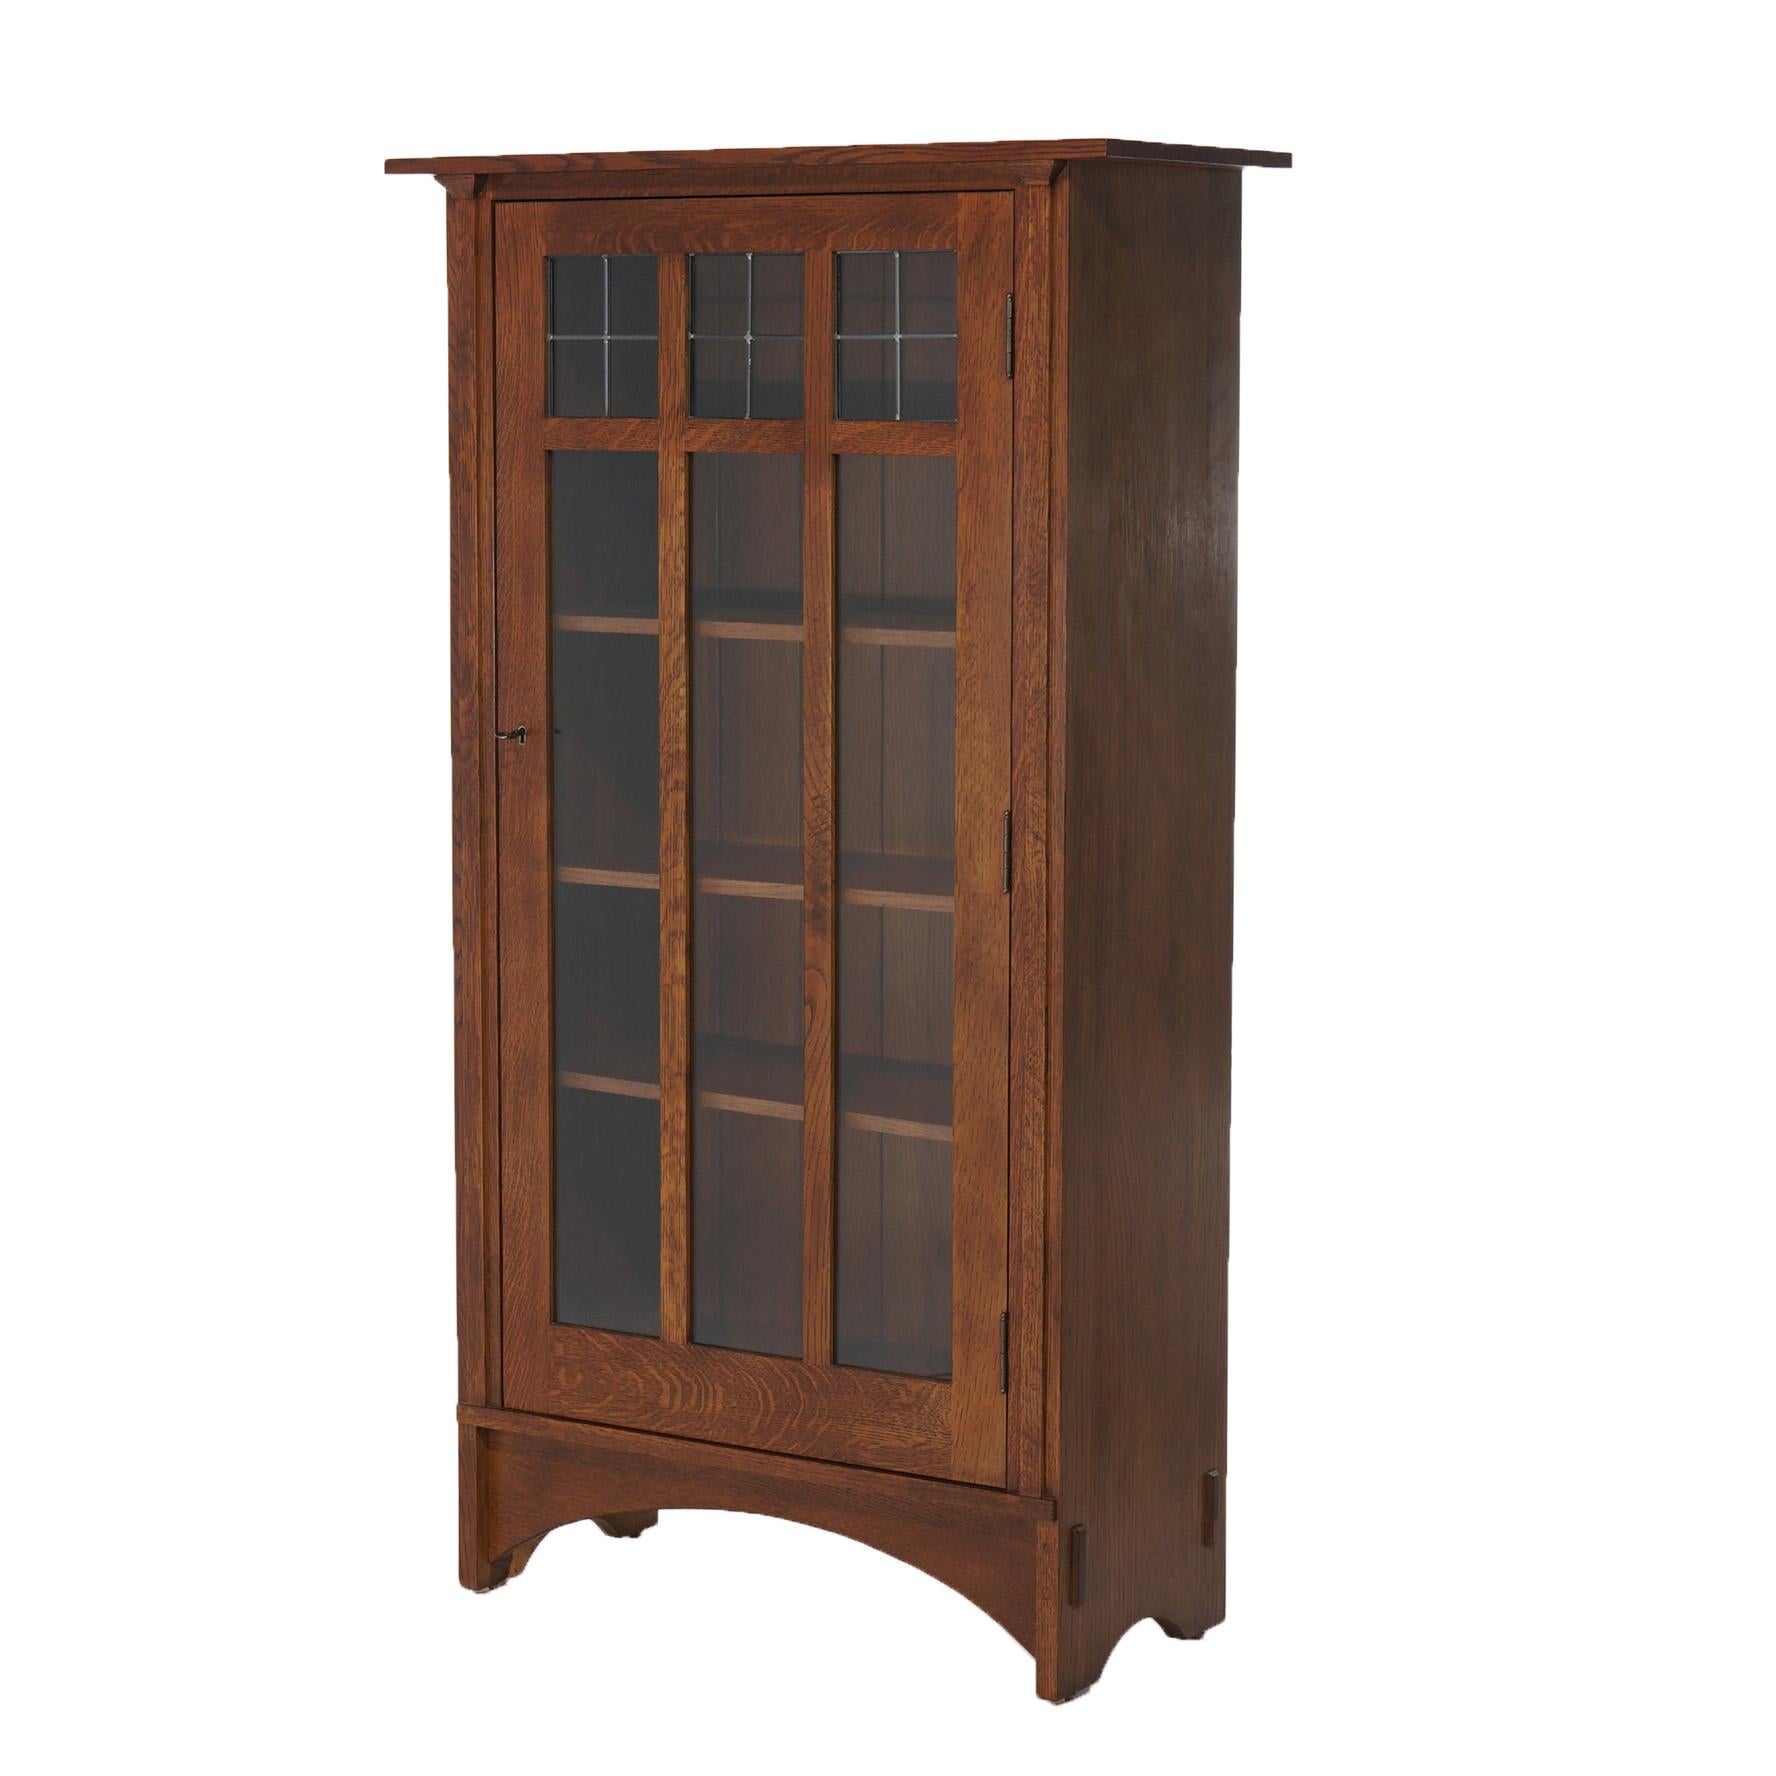 An Arts and Crafts Harvey Ellis design bookcase by Stickley offers quarter sawn oak construction with single door having paneled glass and leaded glass construction opening to adjustable shelf interior, maker stamps en verso as photographed, 20th